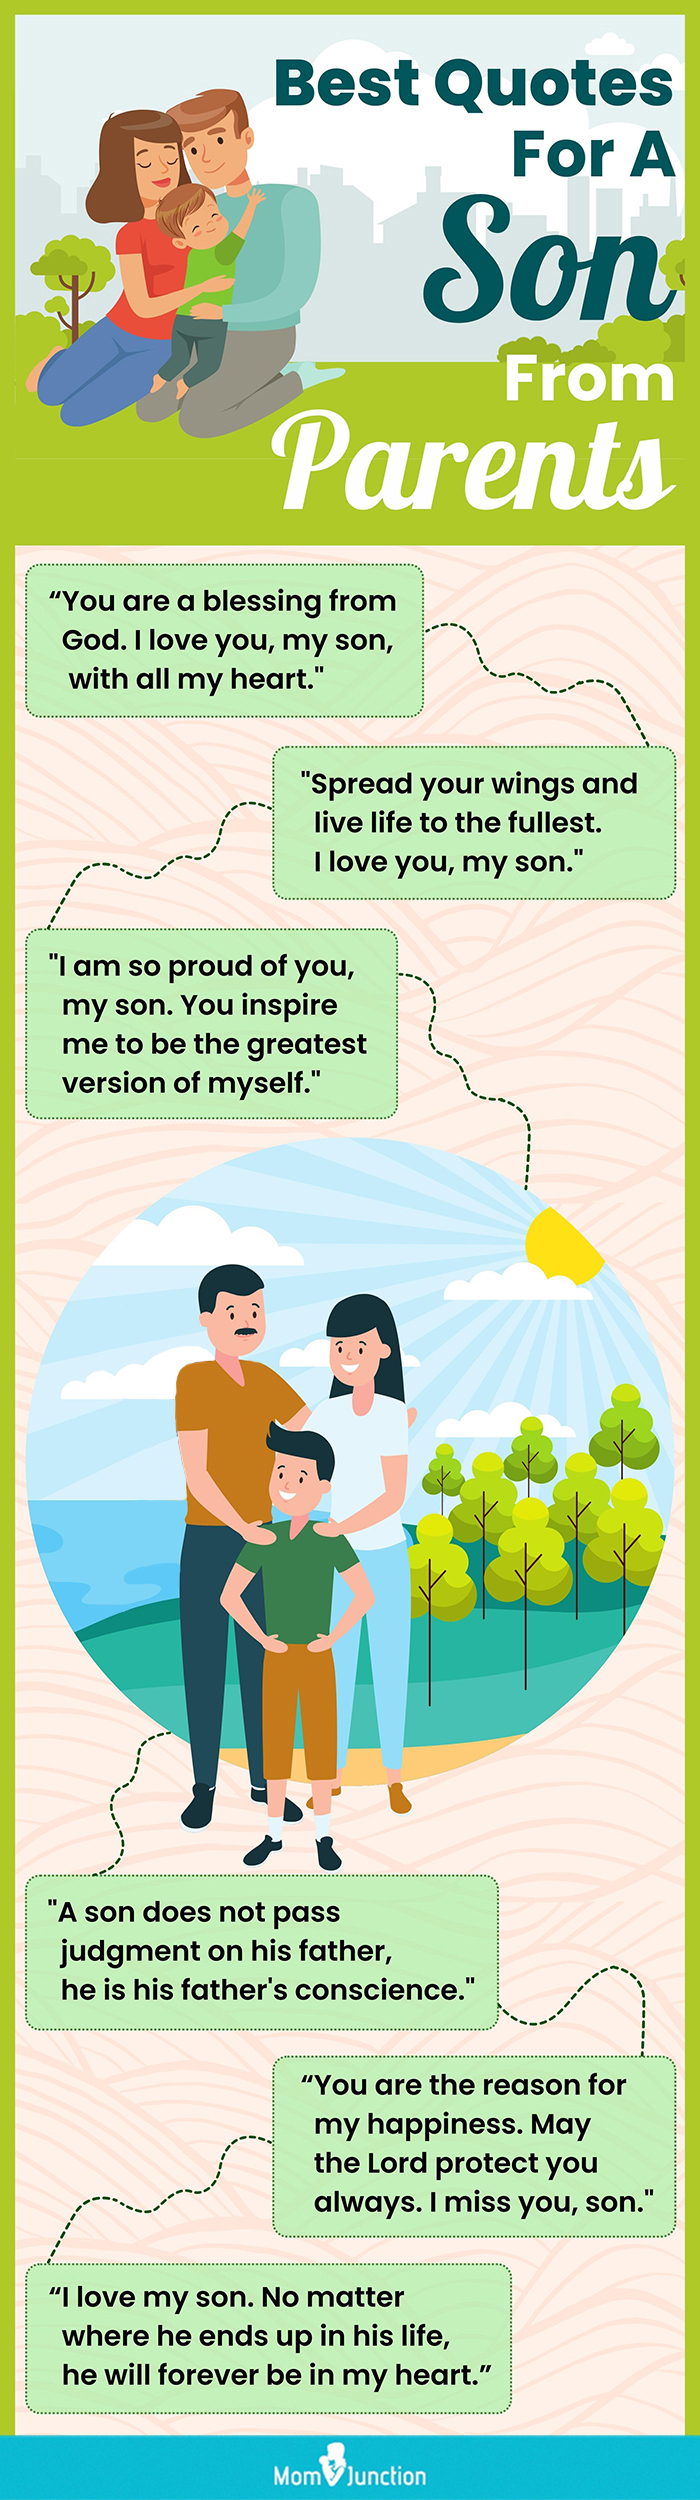 best quotes for a son from parents (infographic)